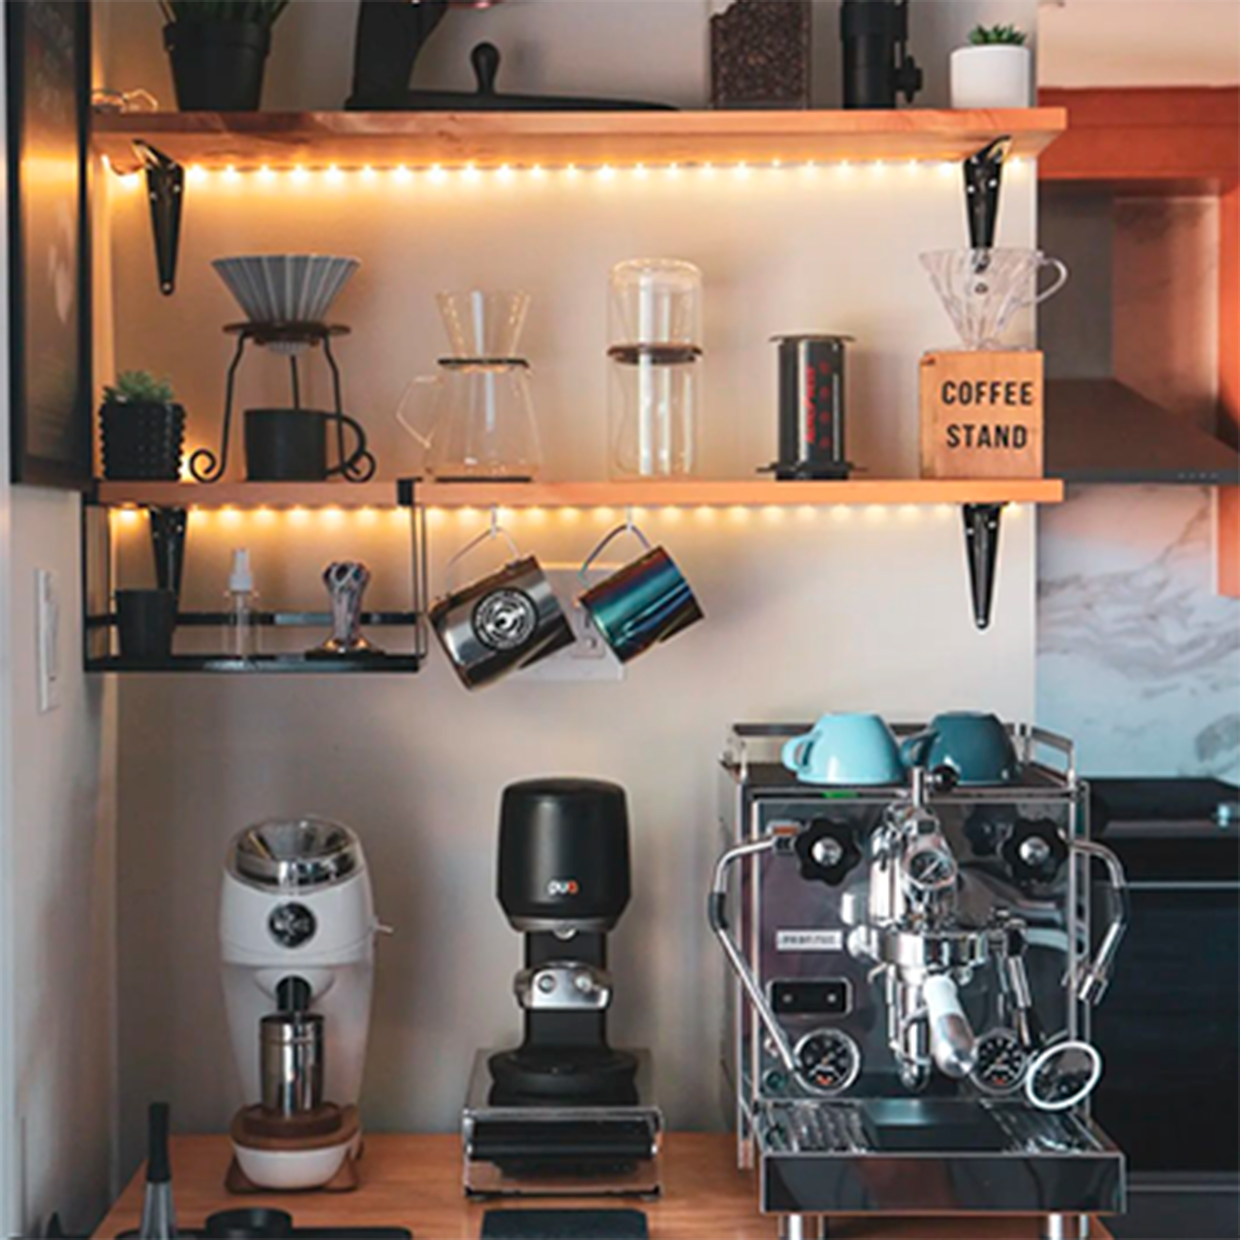 Feel inspired with these DIY home coffee bar ideas - Gathered